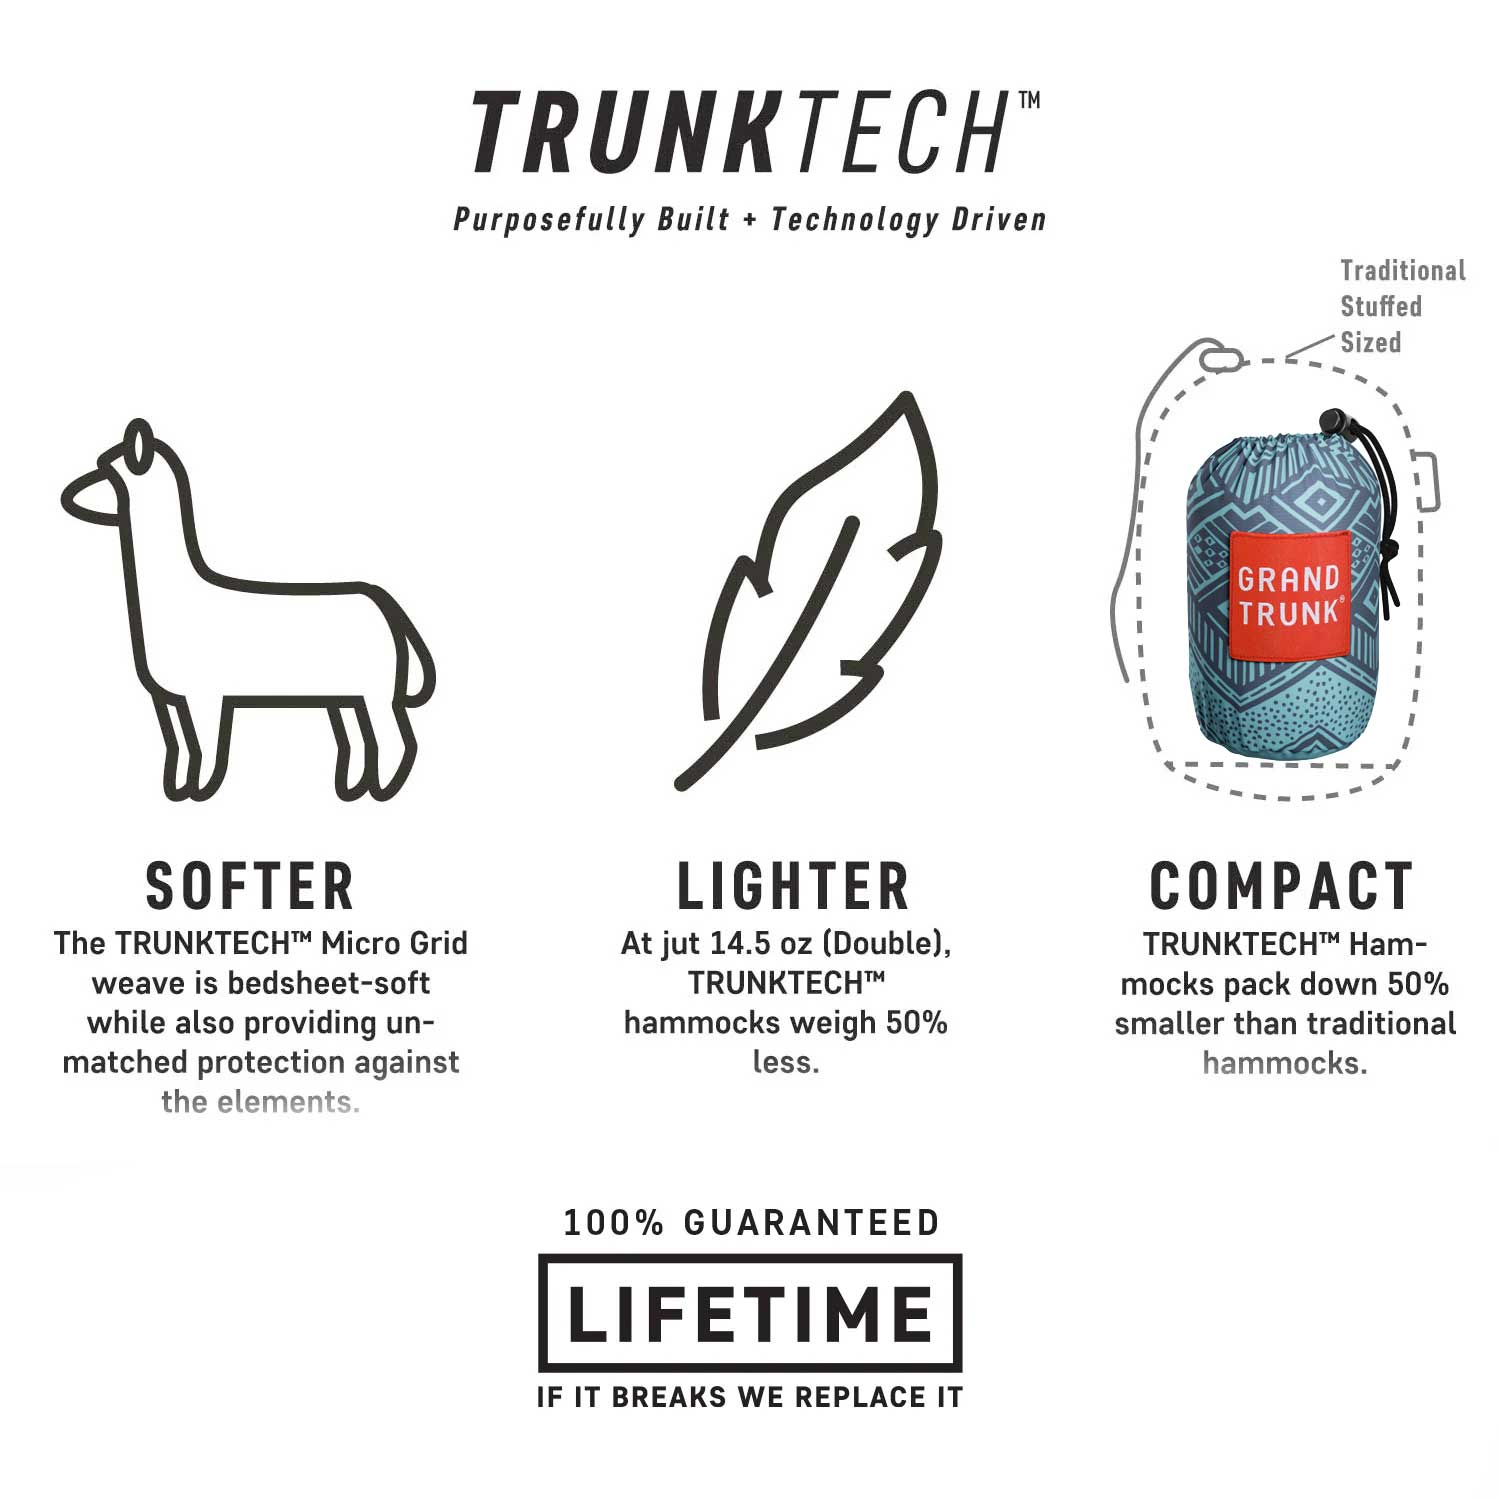 softer lighter more compact, trunktech™ is the best hammock on the planet